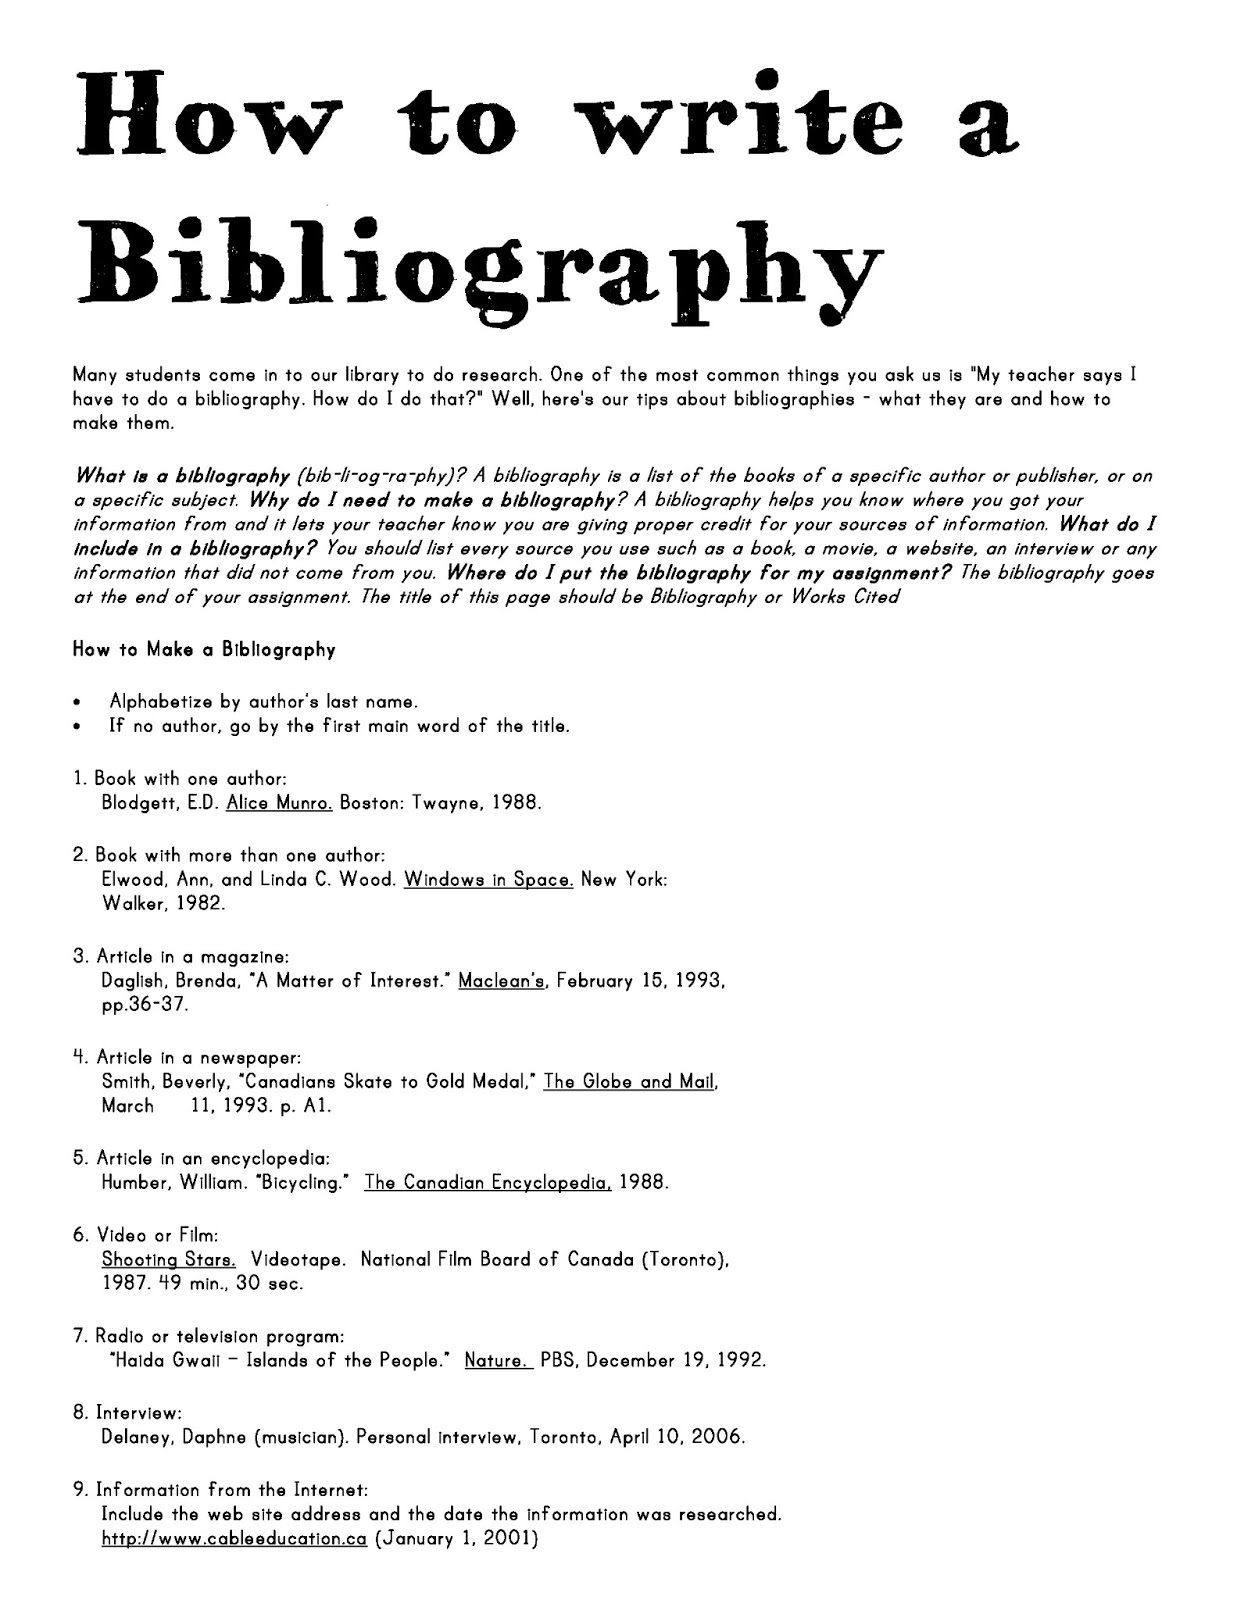 Sample bibliography for thesis